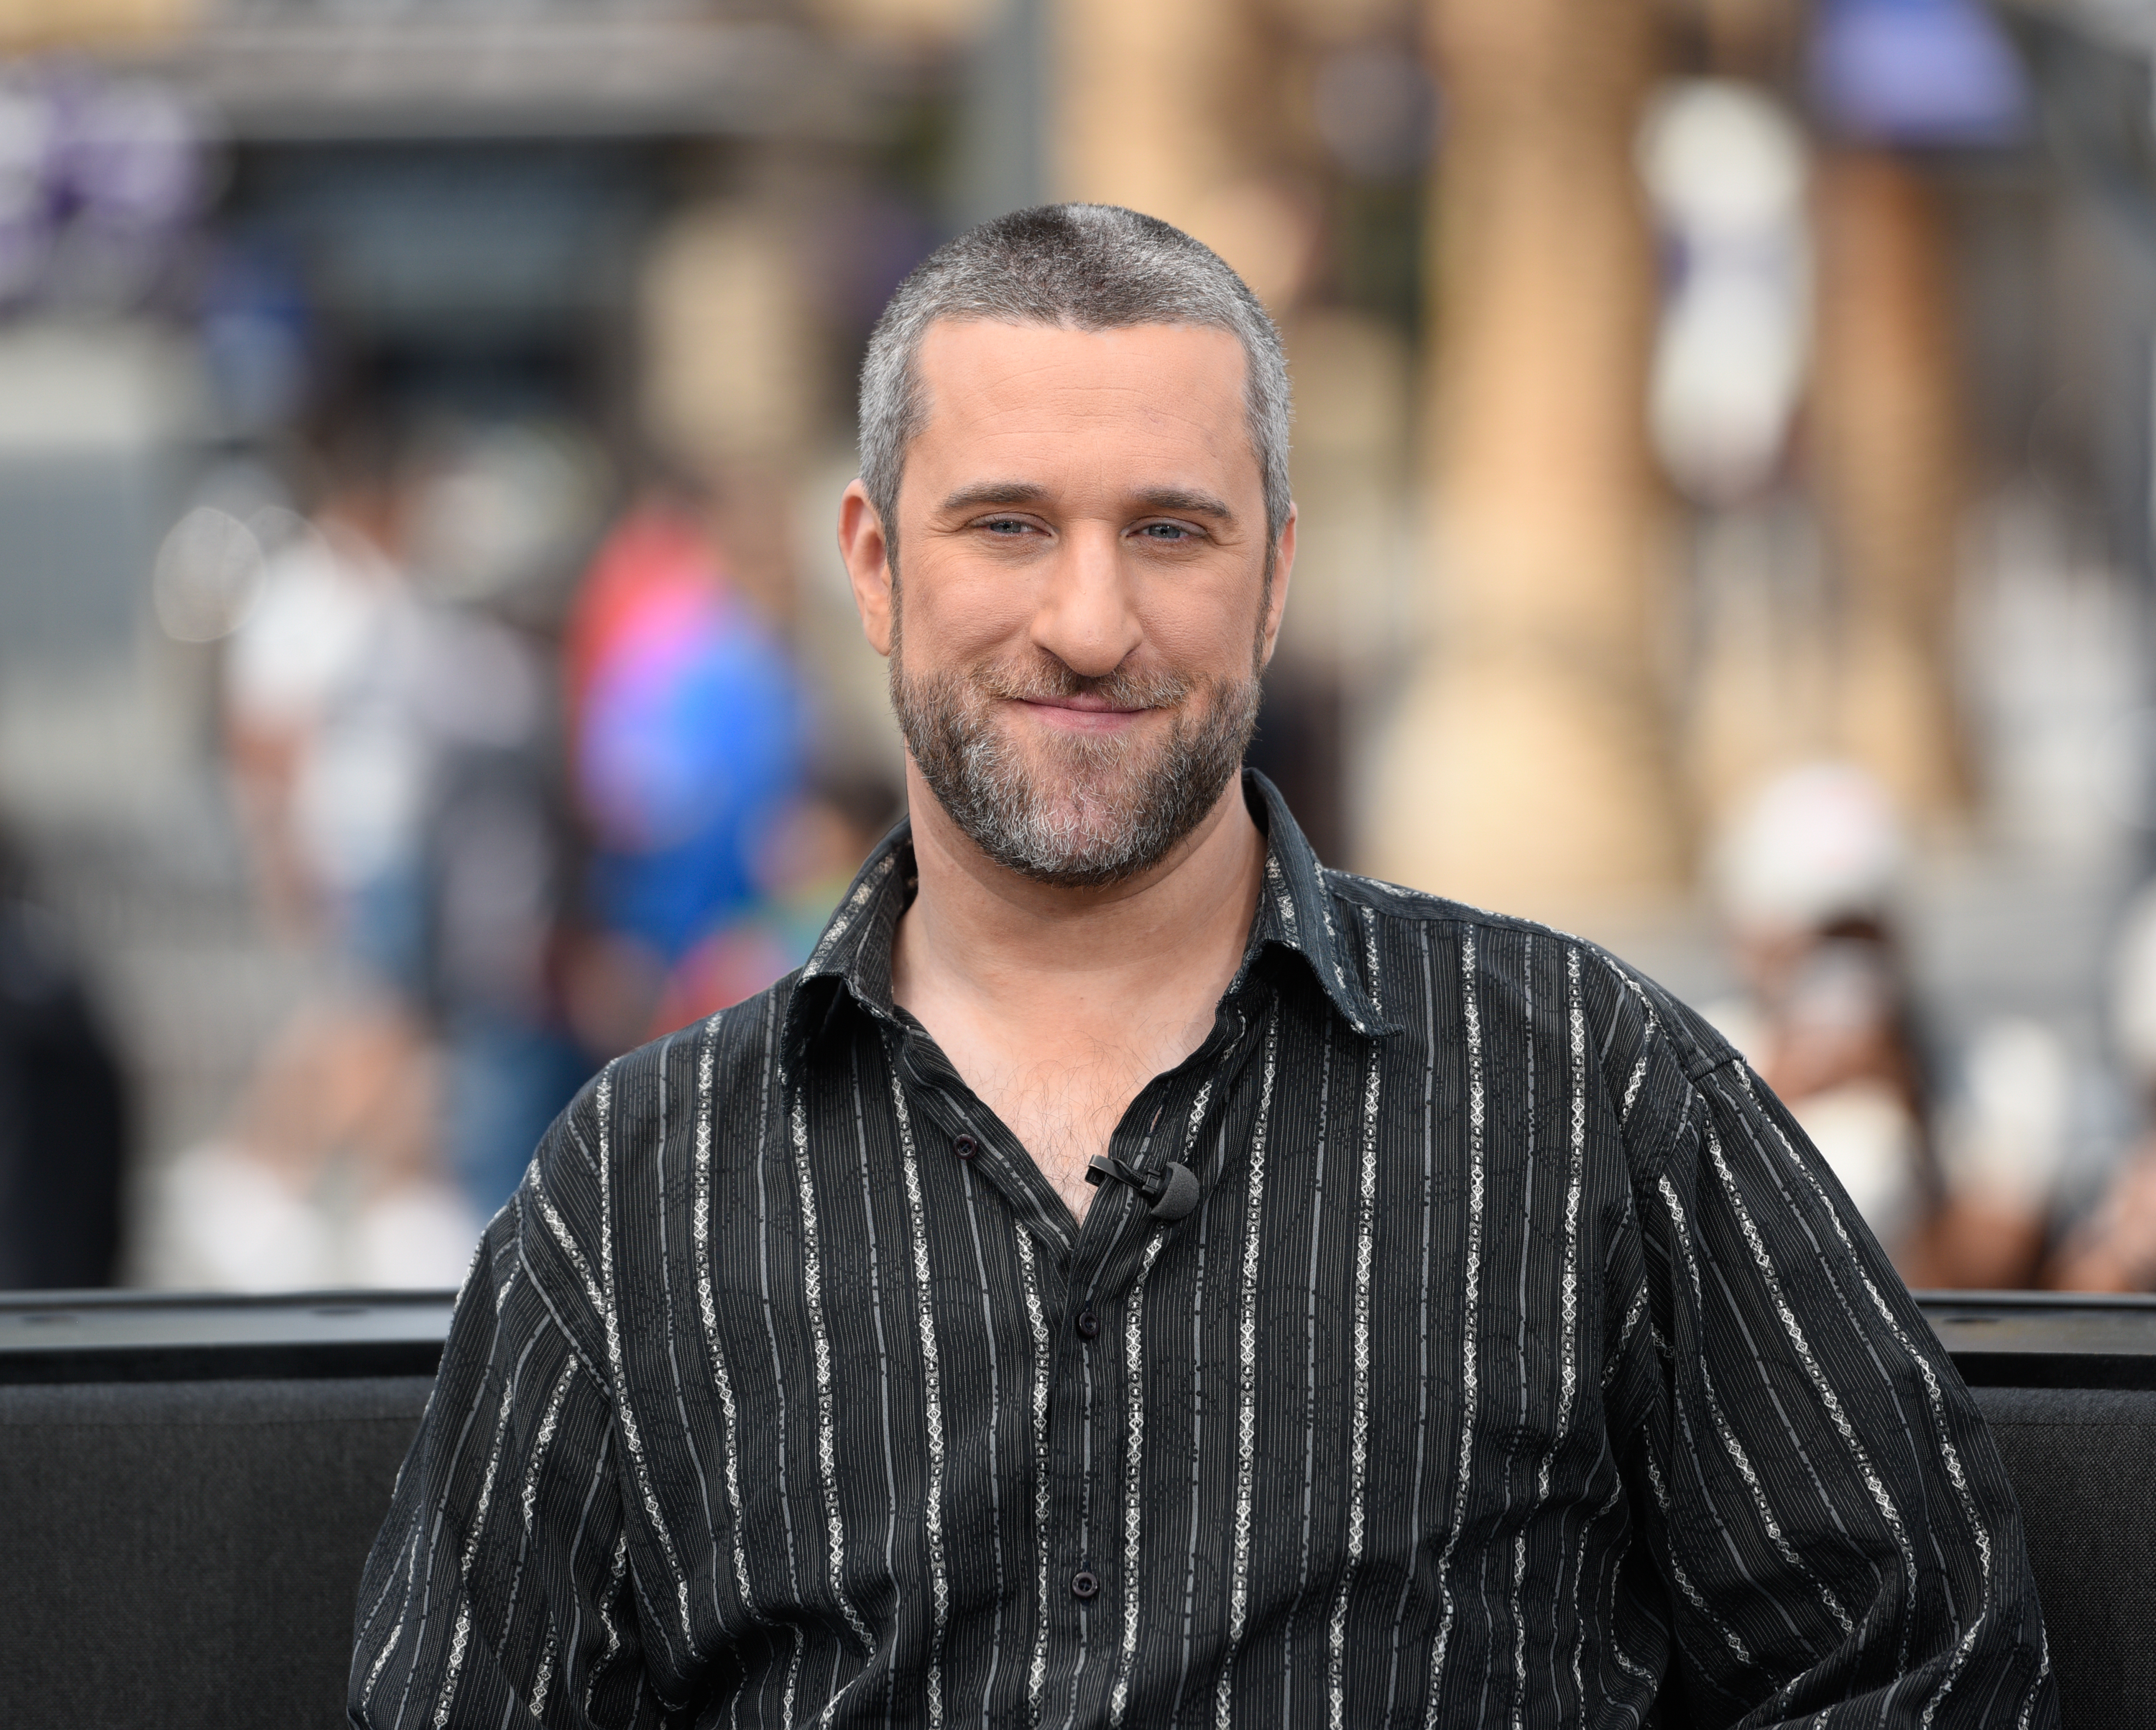 Dustin Diamond visits "Extra" at Universal Studios Hollywood on May 16, 2016, in Universal City, California. | Source: Getty Images